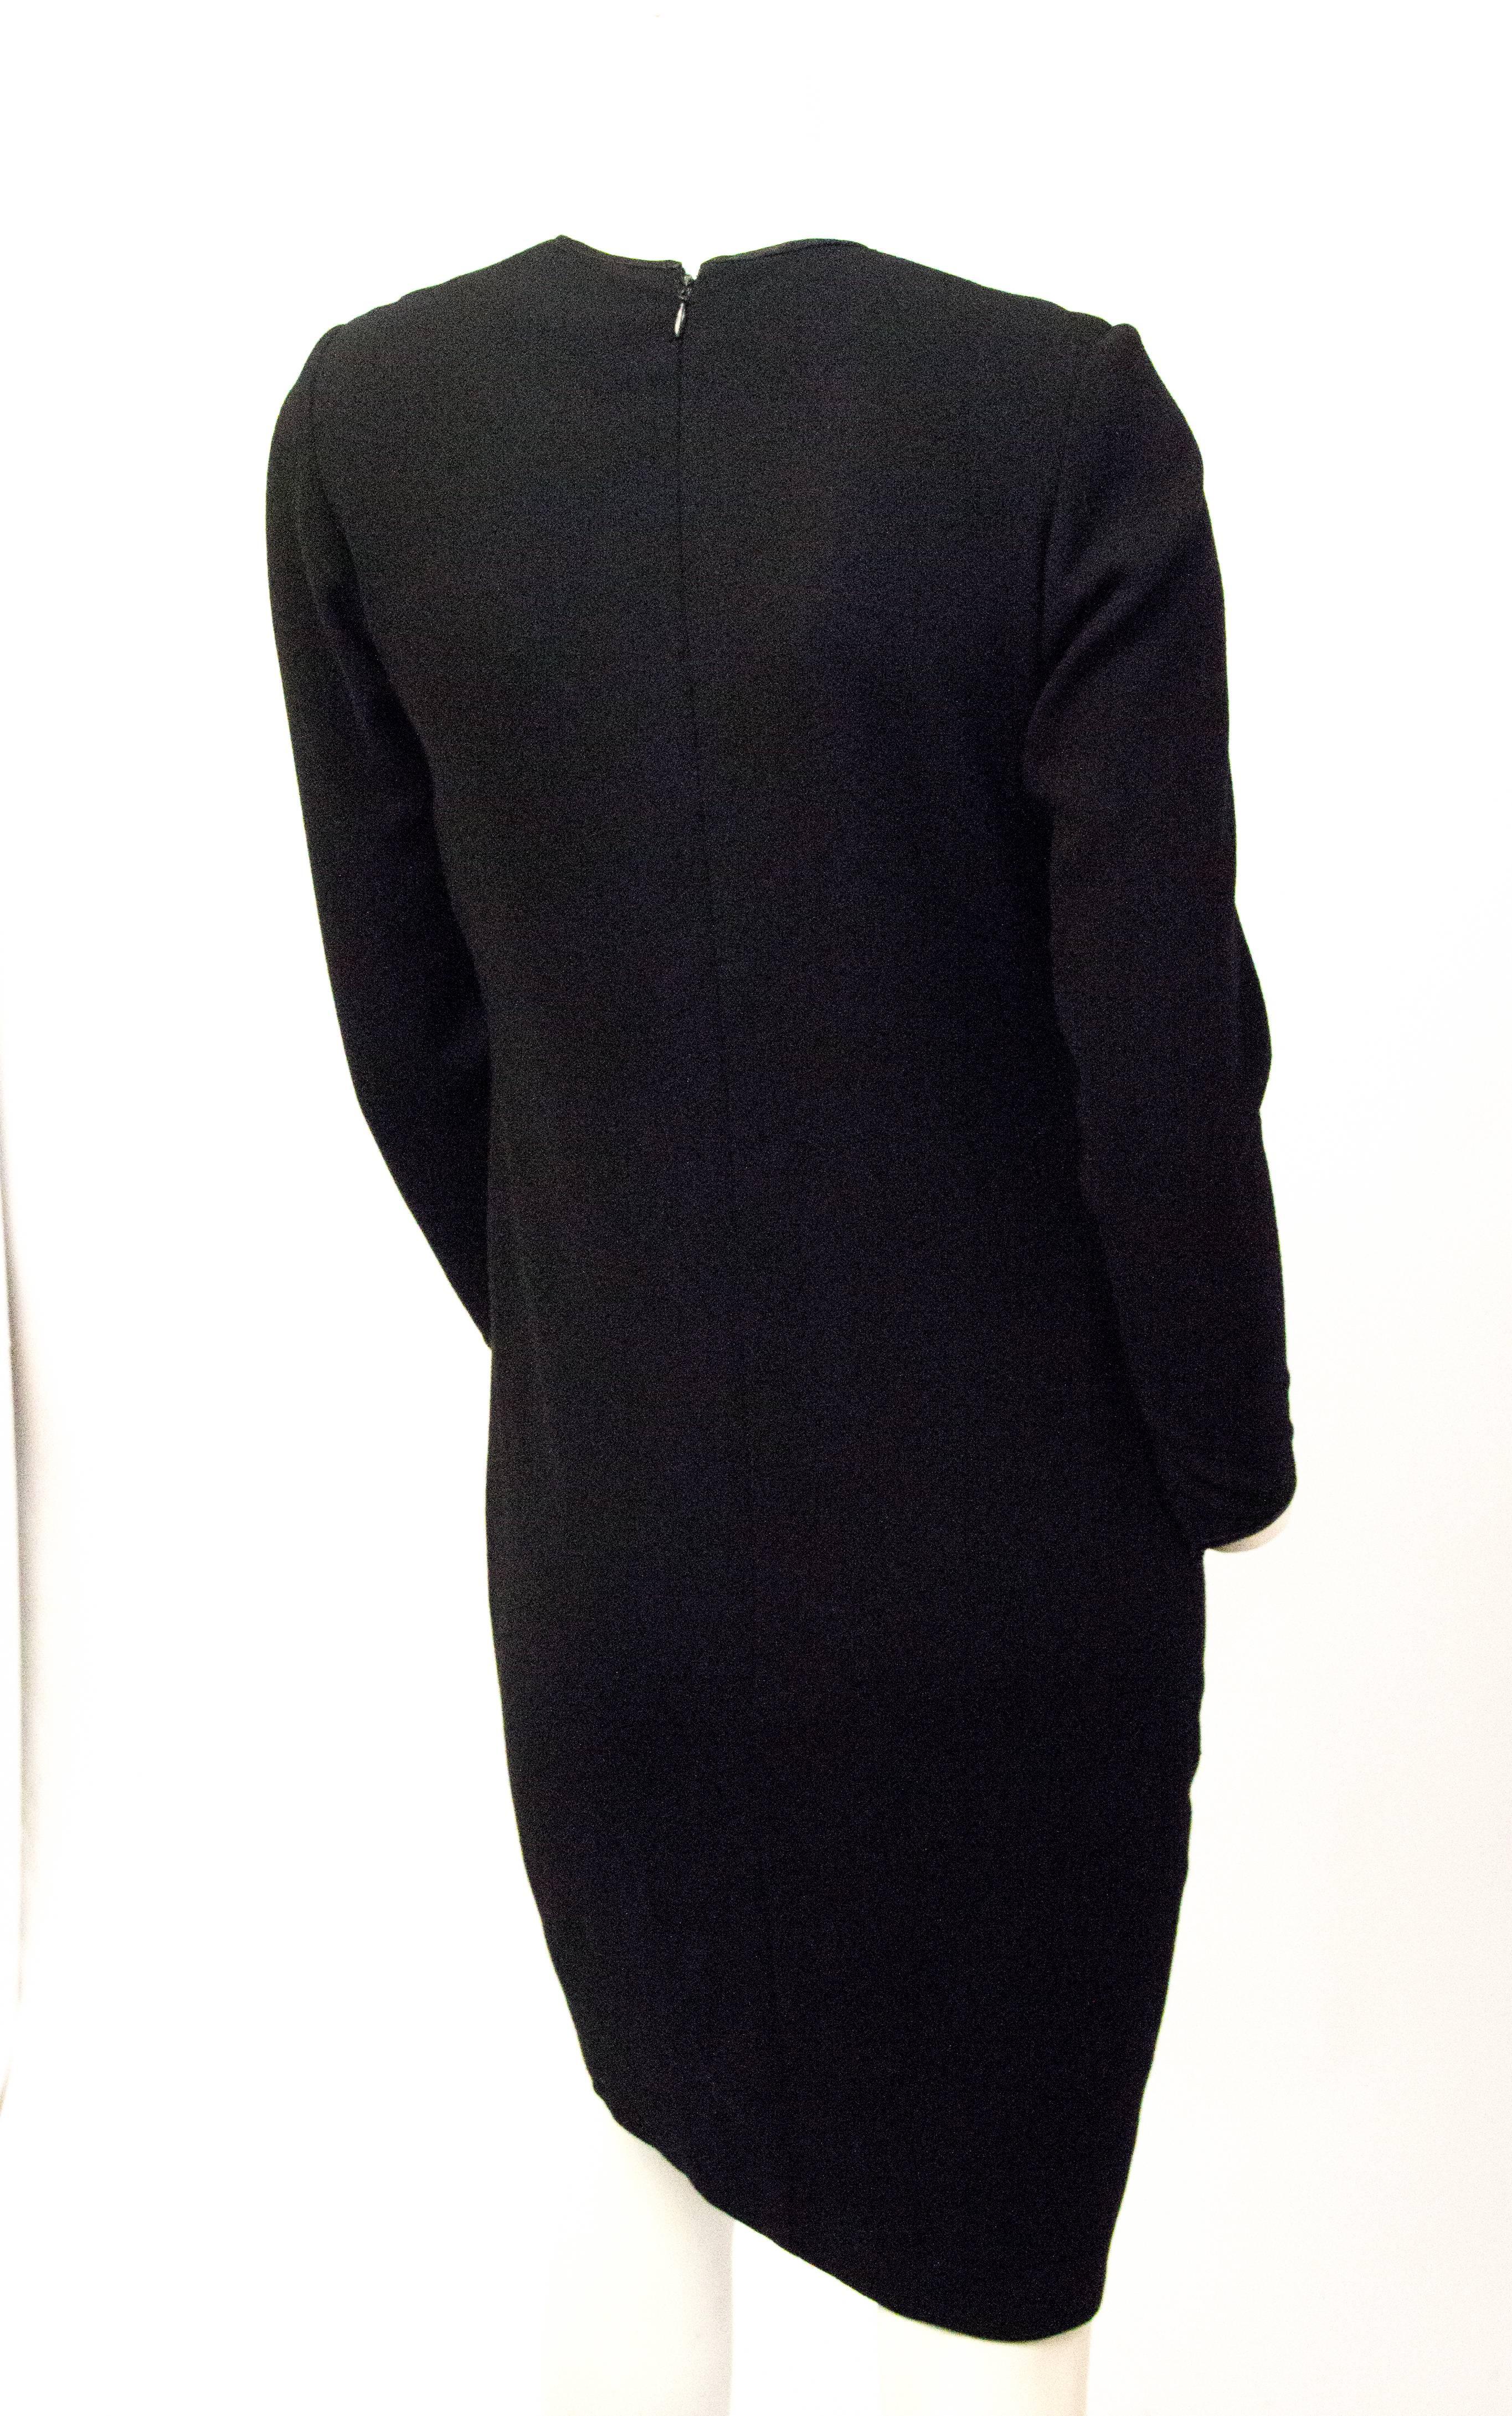 80s Galanos black crepe sheath with long sleeves that zip at the wrist. Black silk  insert in top front of bodice. Fully lined in silk chiffon. Zips up the back. 